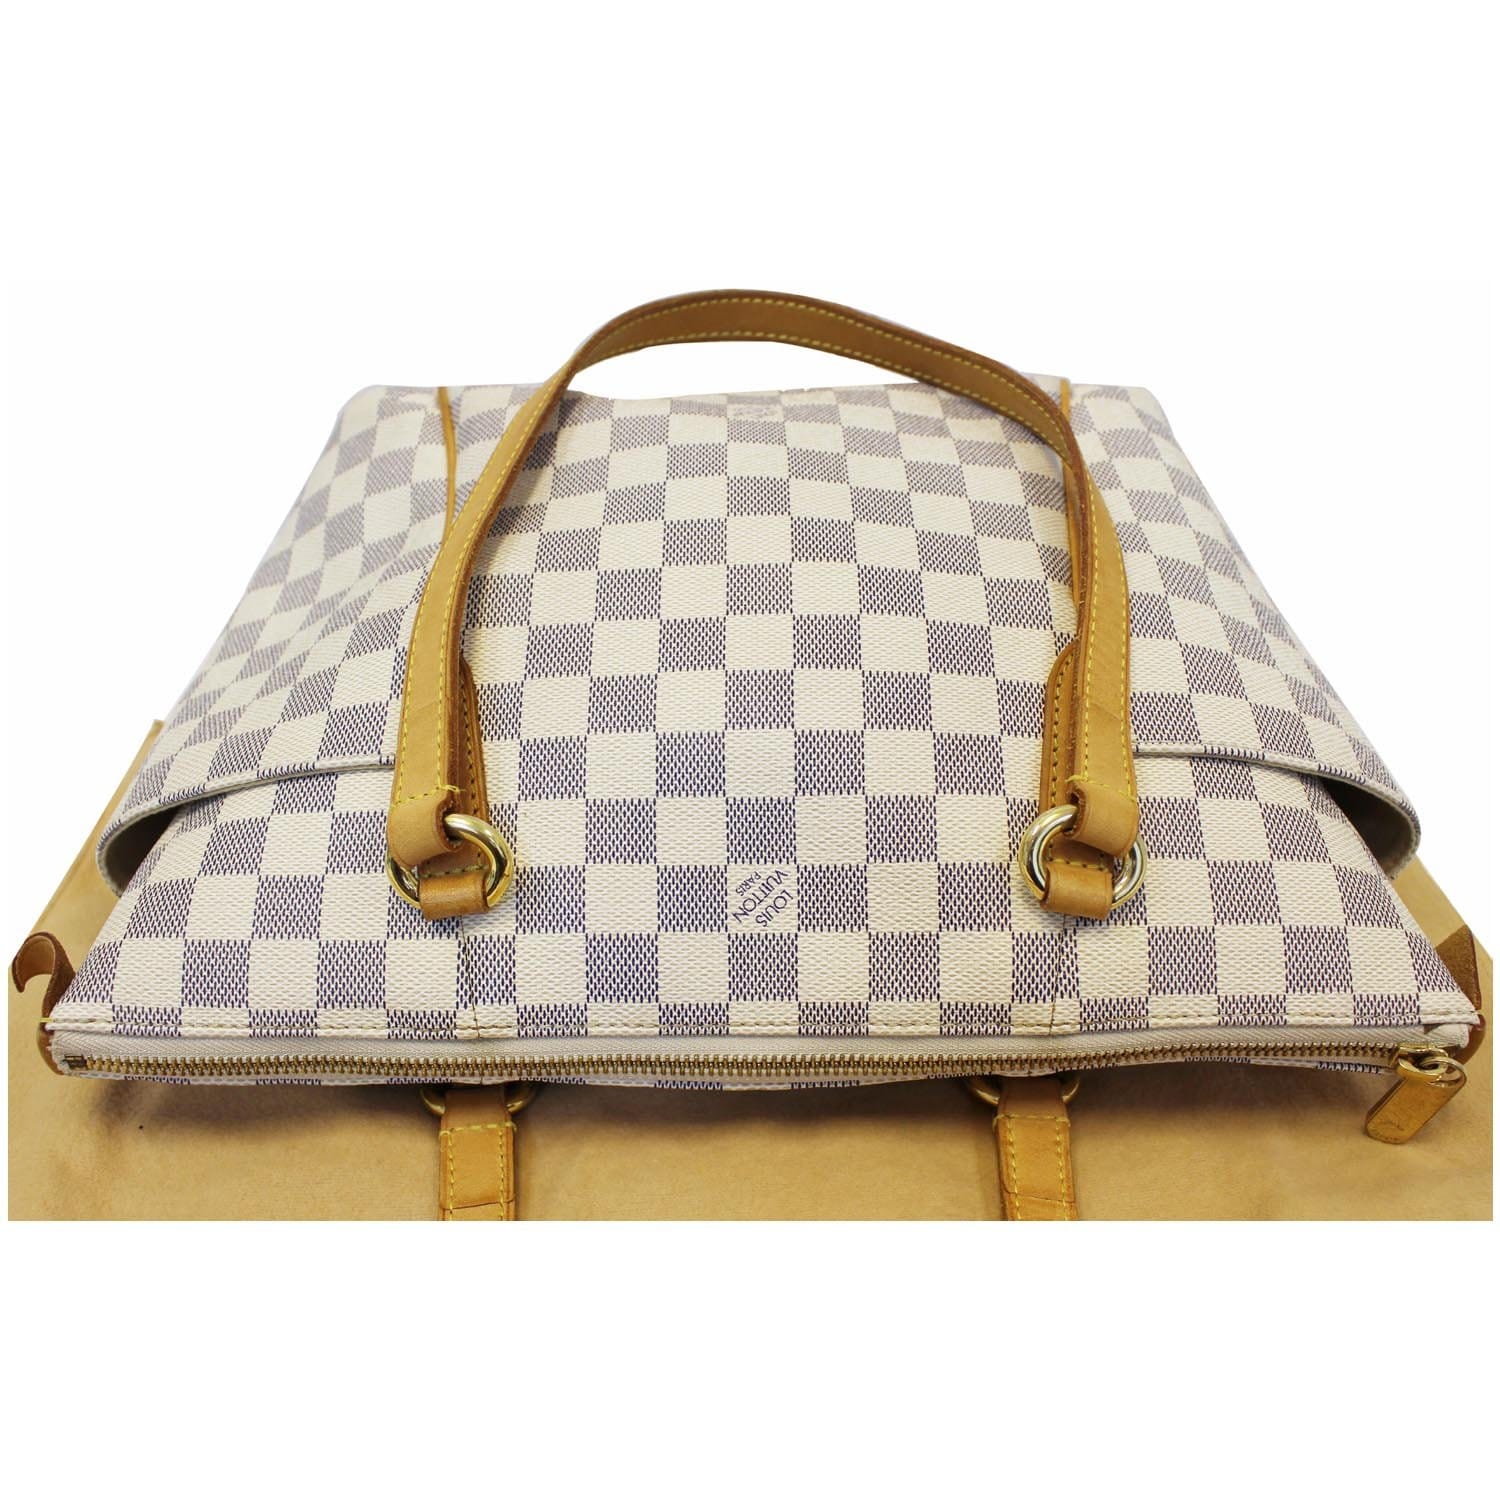 Authentic Louis Vuitton Totally PM Damier Azur from 2008 collection